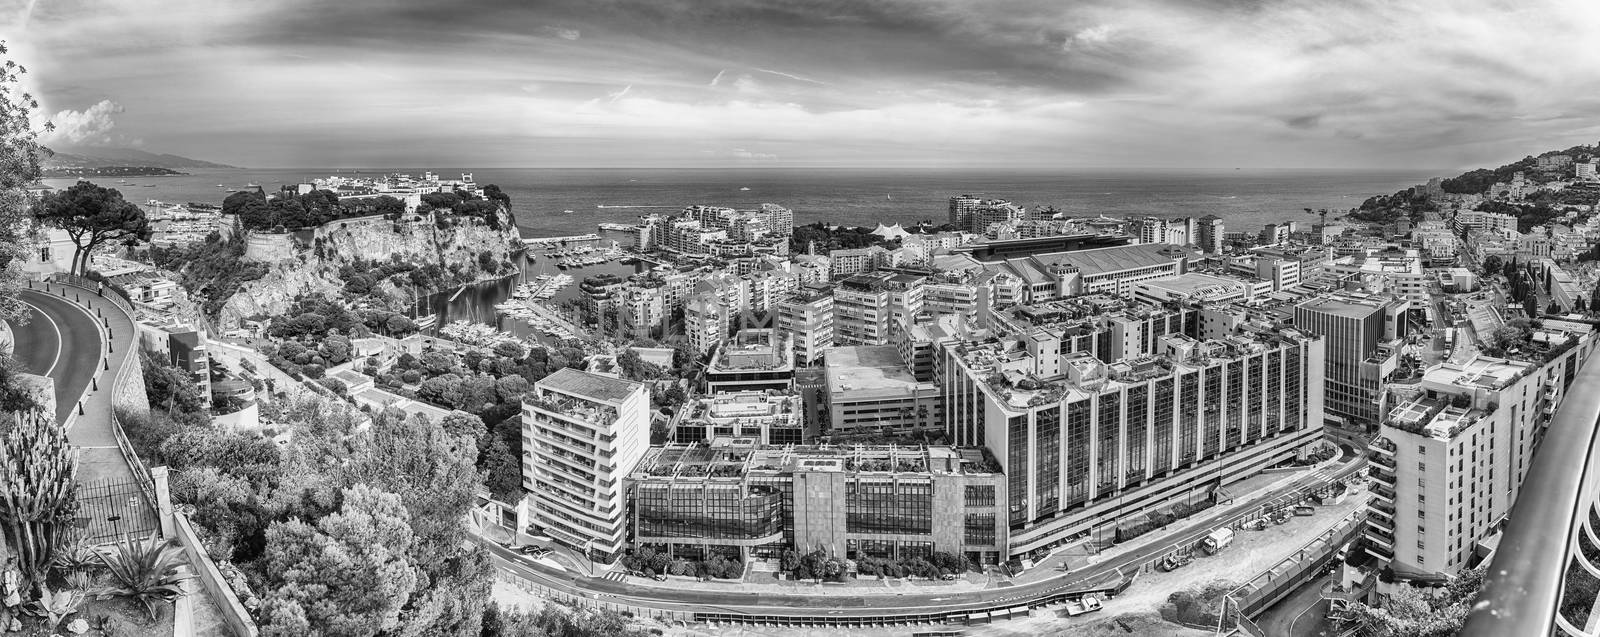 Panoramic view of Fontvieille district in the Principality of Monaco, Cote d'Azur, French Riviera